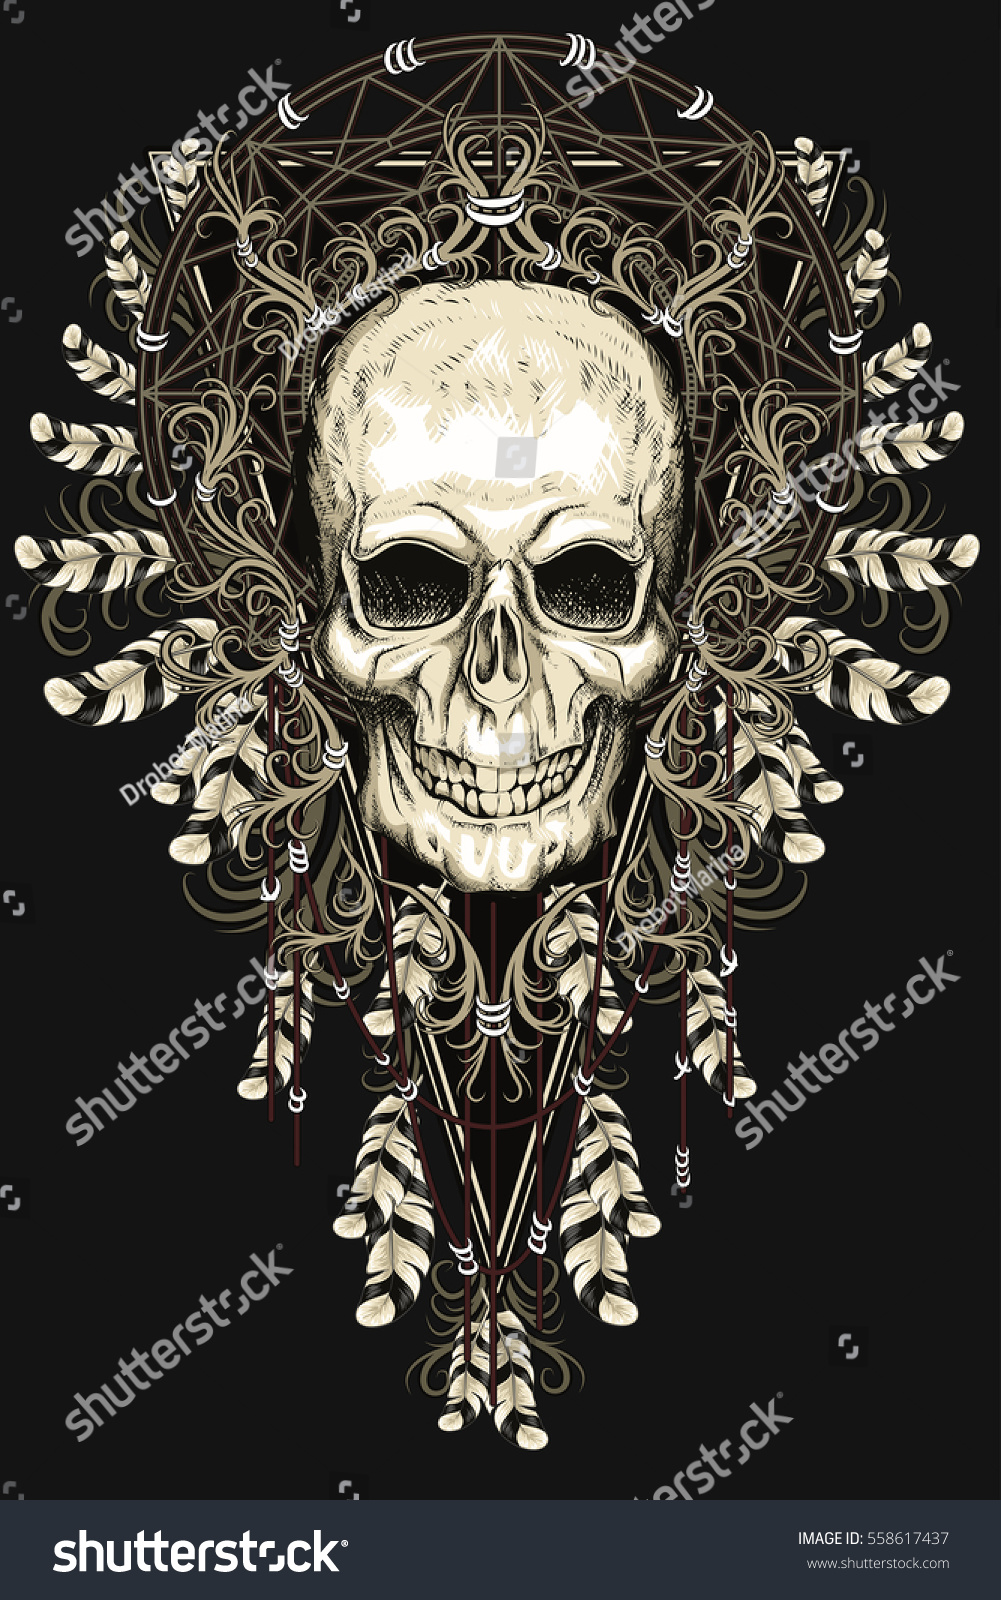 Skull Feathers Patterns Stock Vector (Royalty Free) 558617437 ...